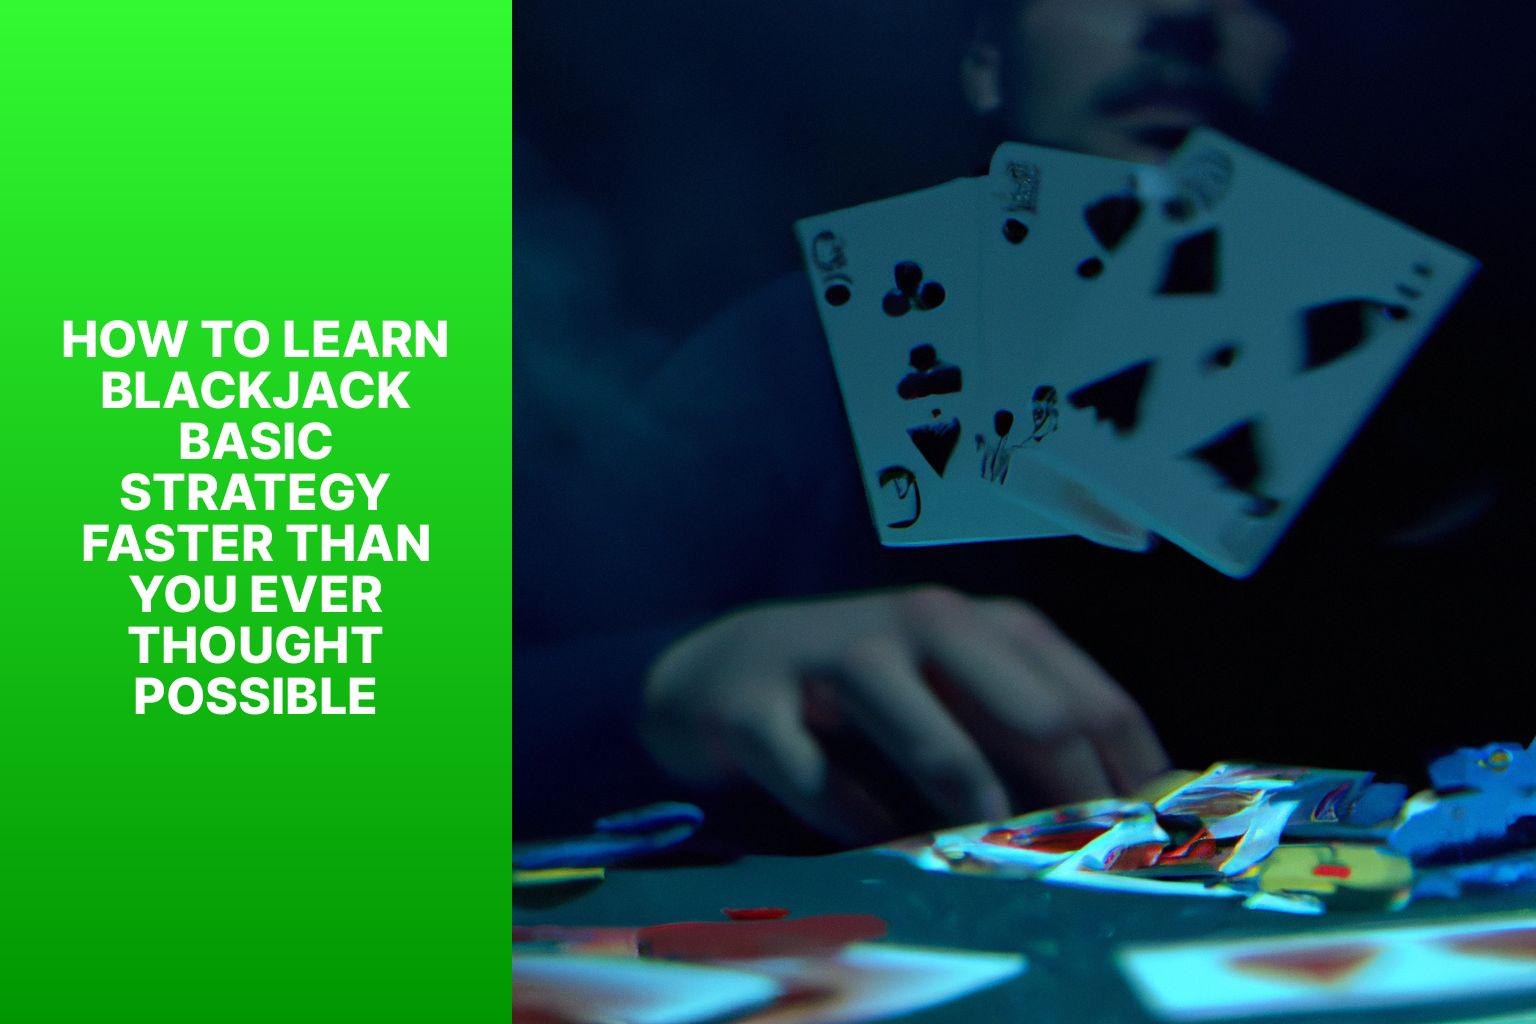 How to Learn Blackjack Basic Strategy Faster than You Ever Thought Possible